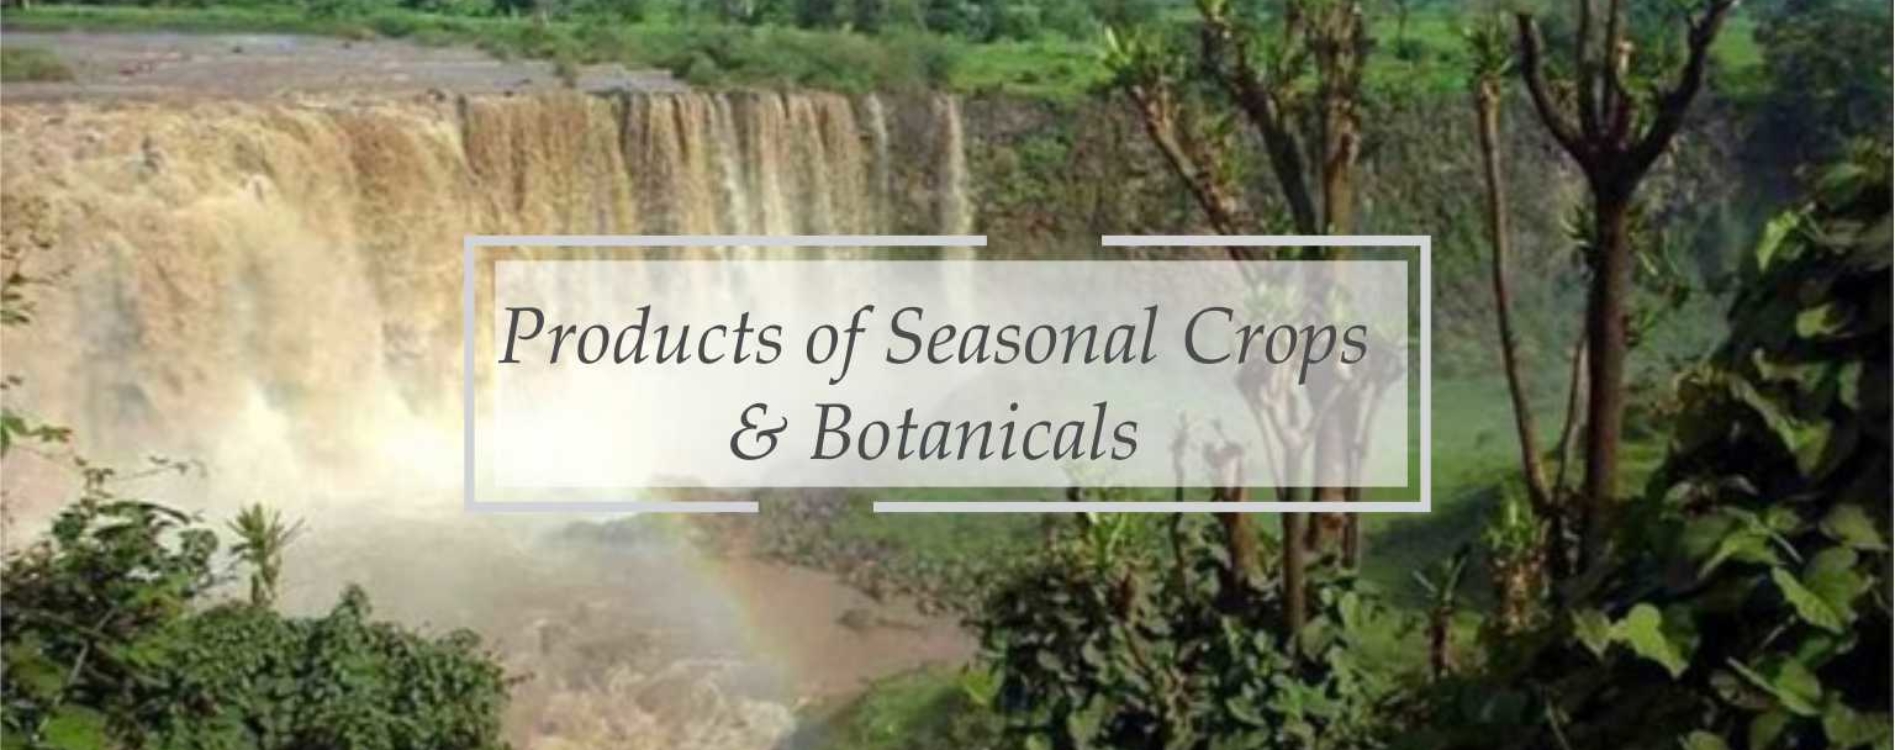 Products of seasonal crops botanicals